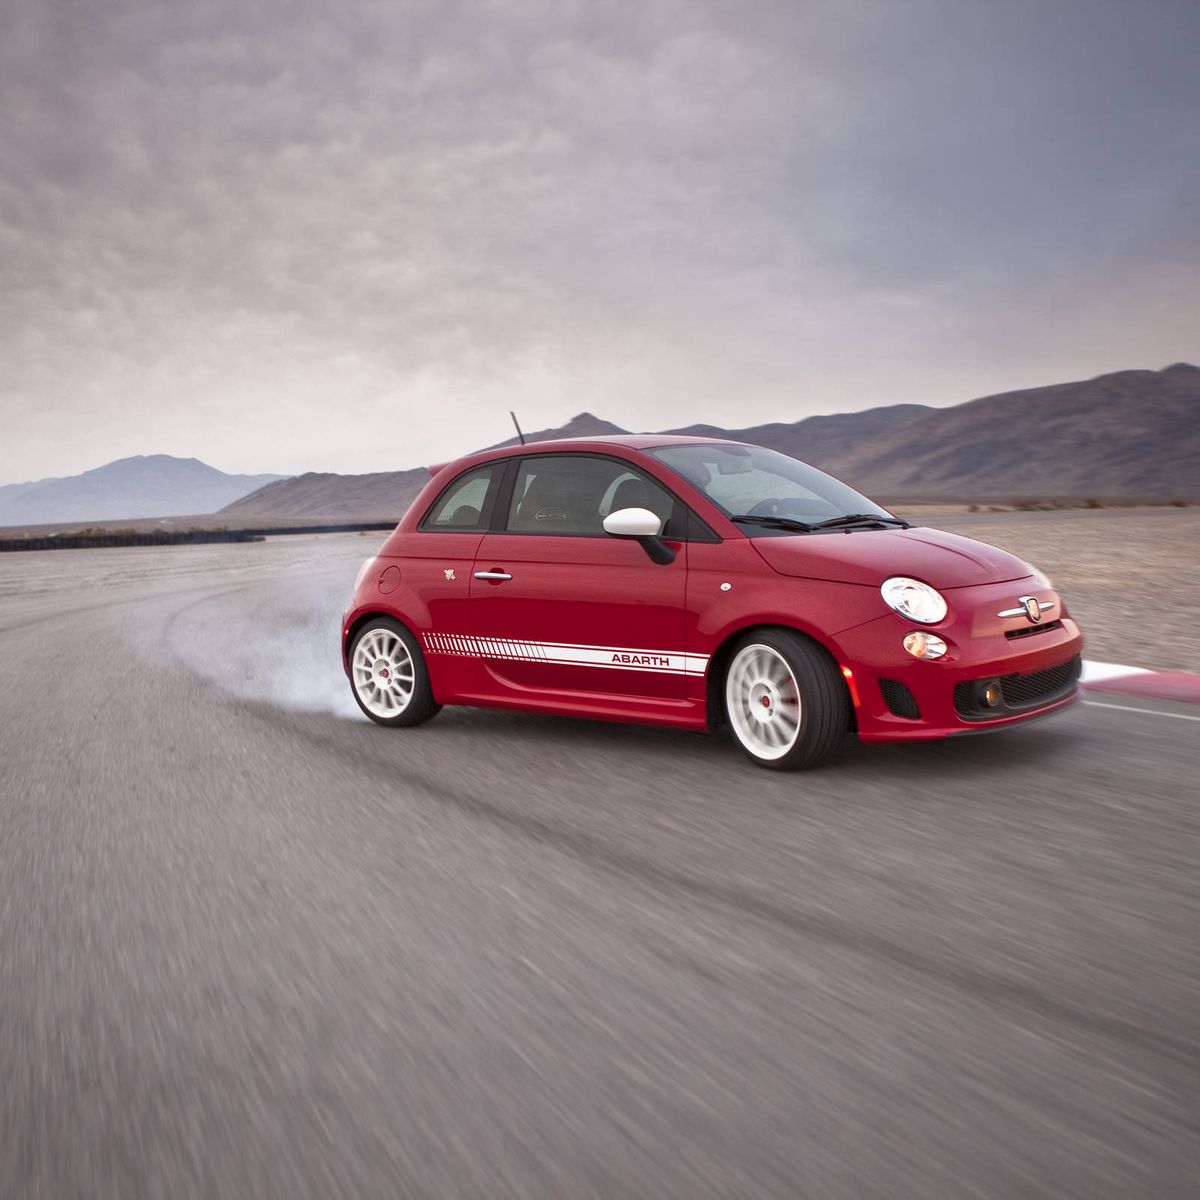 2016 Fiat 500 Abarth drive review: All you need is the engine